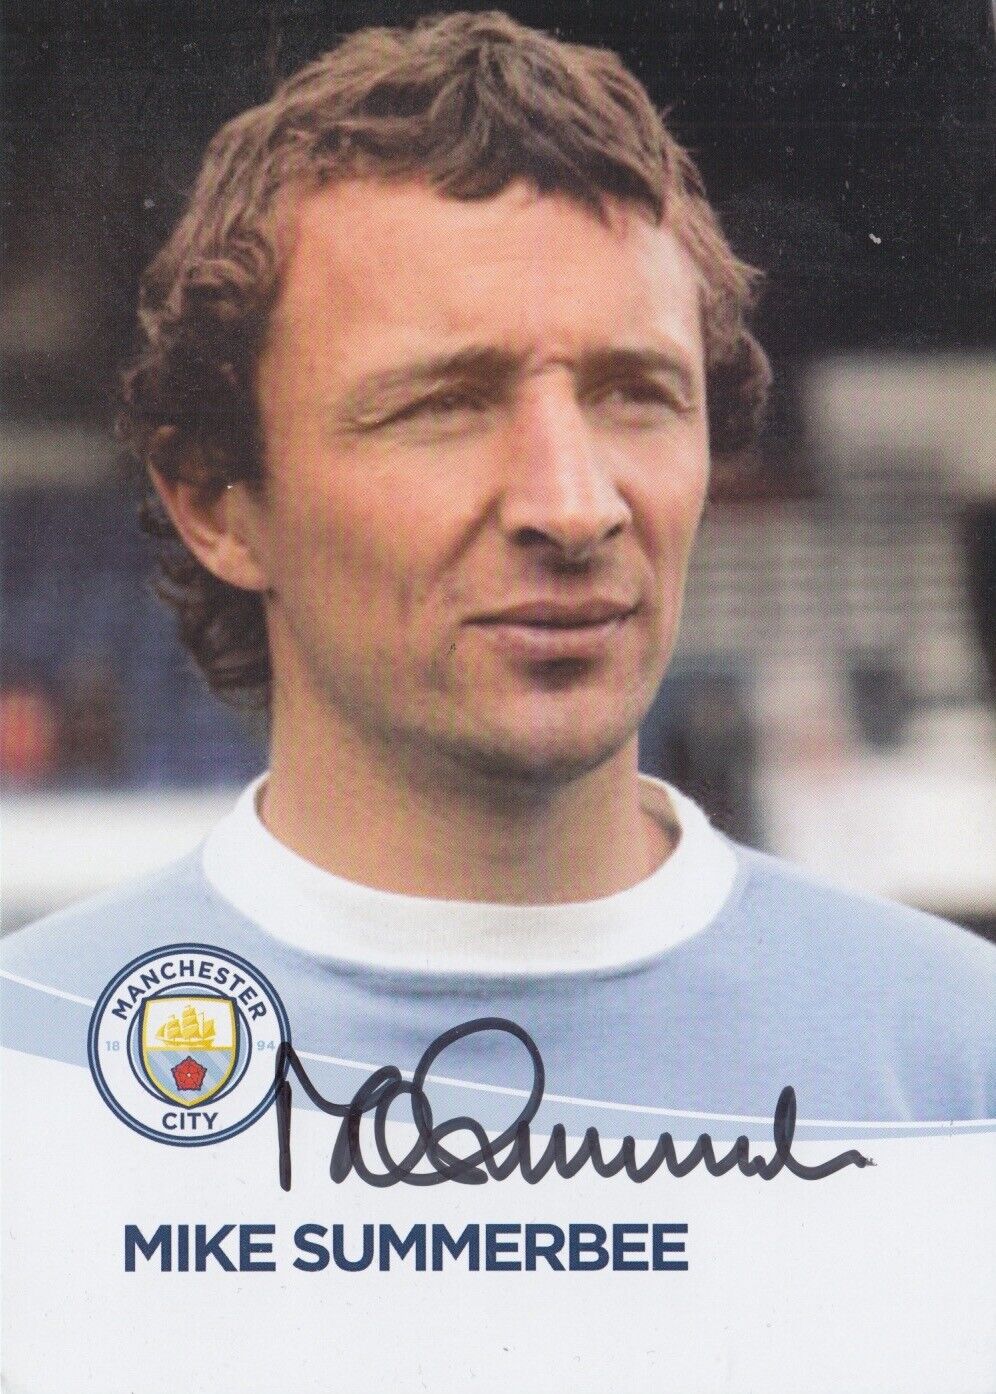 Mike Summerbee Hand Signed 7x5 Photo Poster painting Football Autograph Club Card Manchester